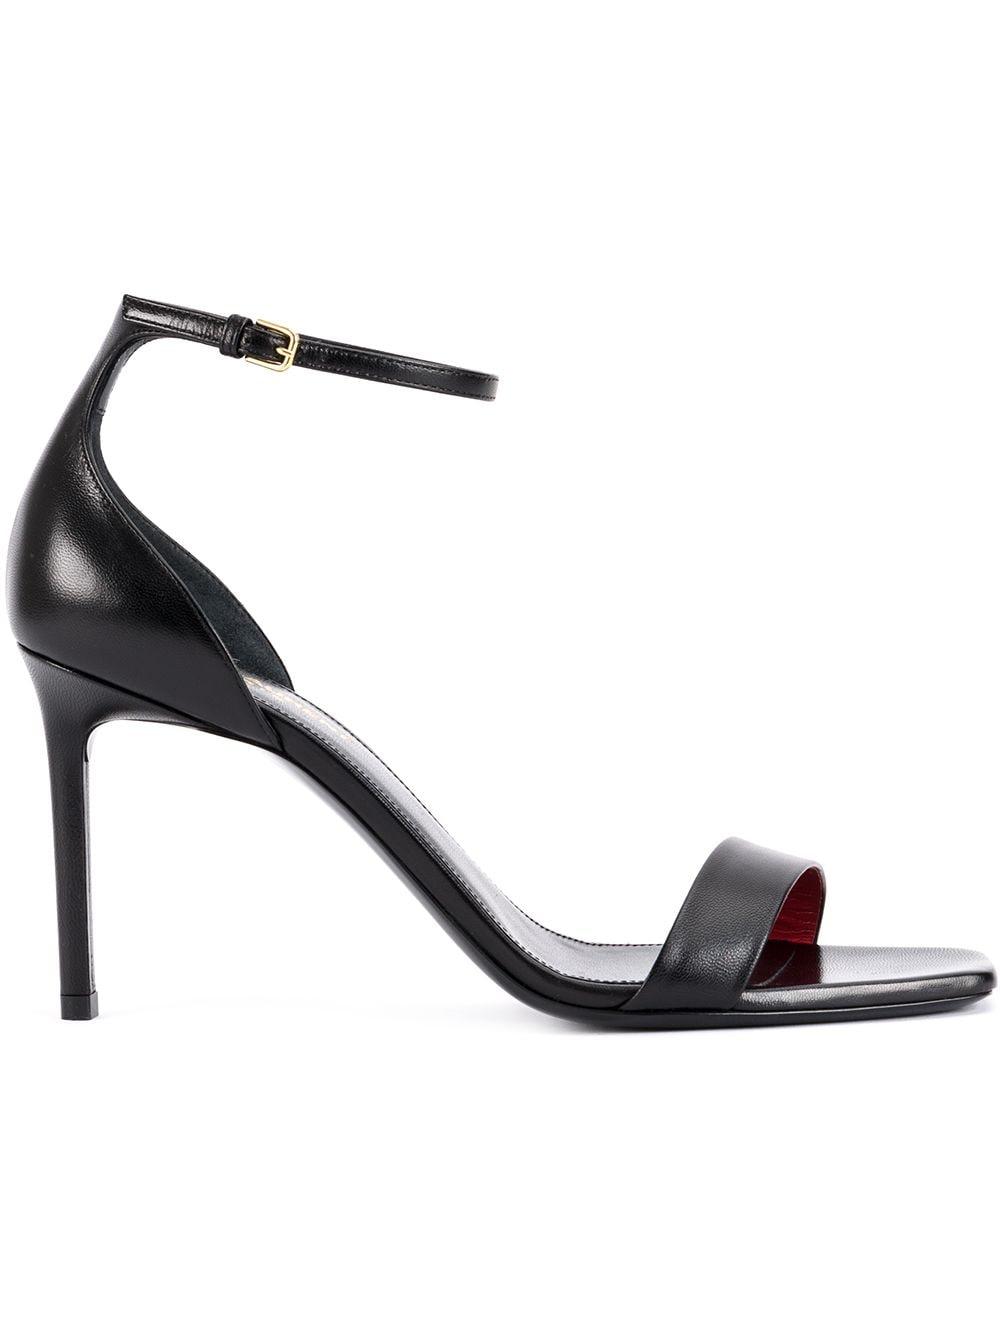 Saint Laurent Leather Amber Sandals in Black - Save 57% | Lyst